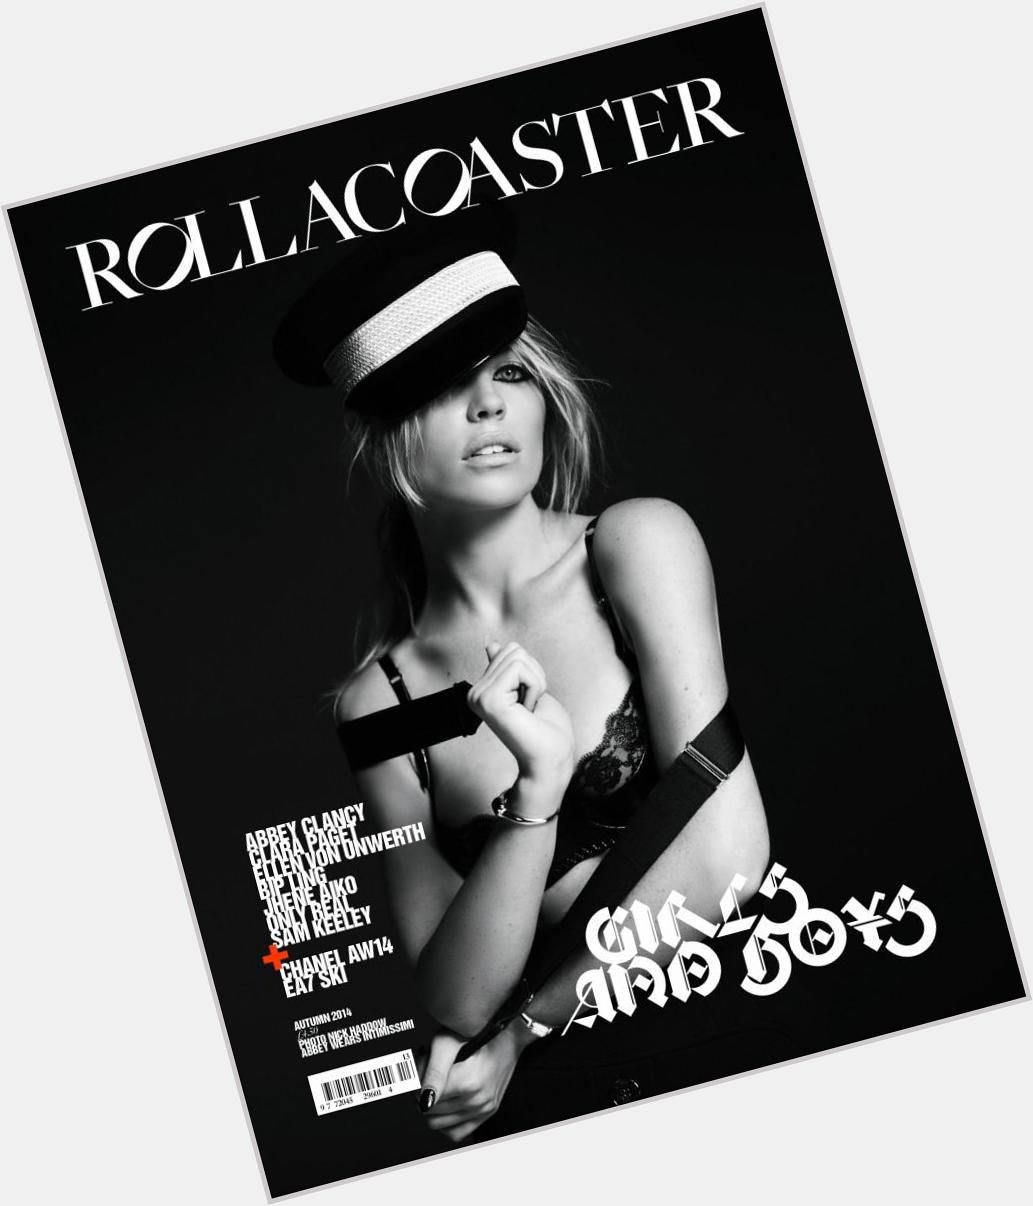 Happy birthday Re-visit Abbey\s Rollacoaster cover feature to celebrate:
 